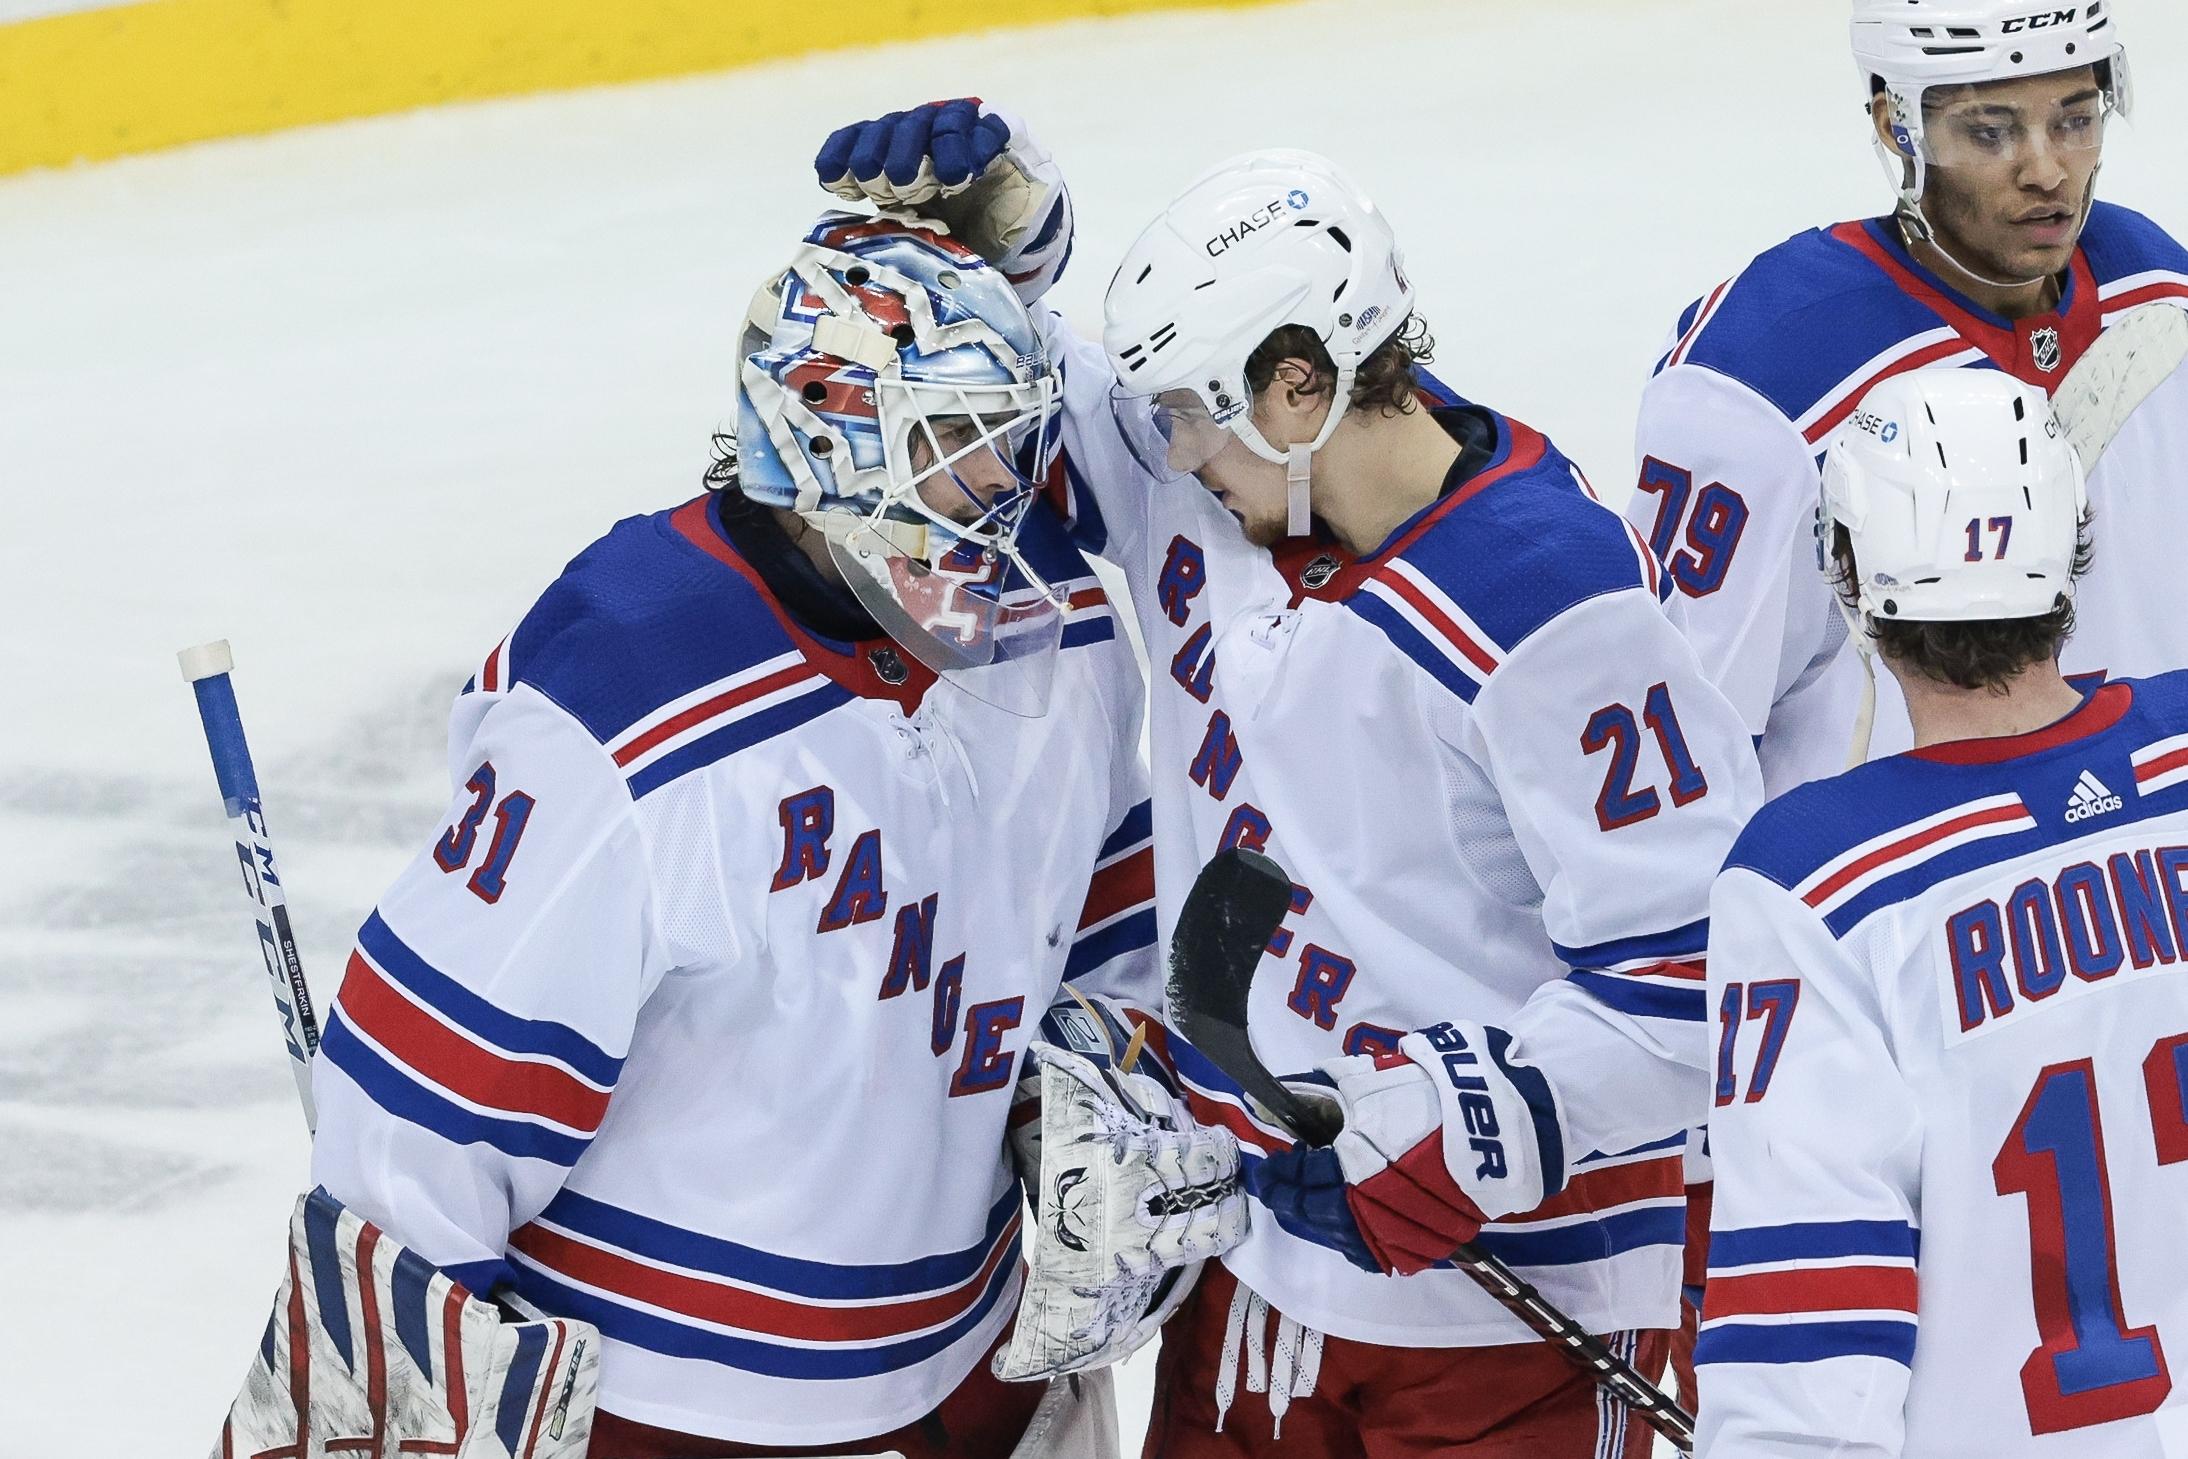 Apr 13, 2021; Newark, New Jersey, USA; New York Rangers goaltender Igor Shesterkin (31) is congratulated by center Brett Howden (21) after the game against the New Jersey Devils at Prudential Center. Mandatory Credit: Vincent Carchietta-USA TODAY Sports / Vincent Carchietta-USA TODAY Sports